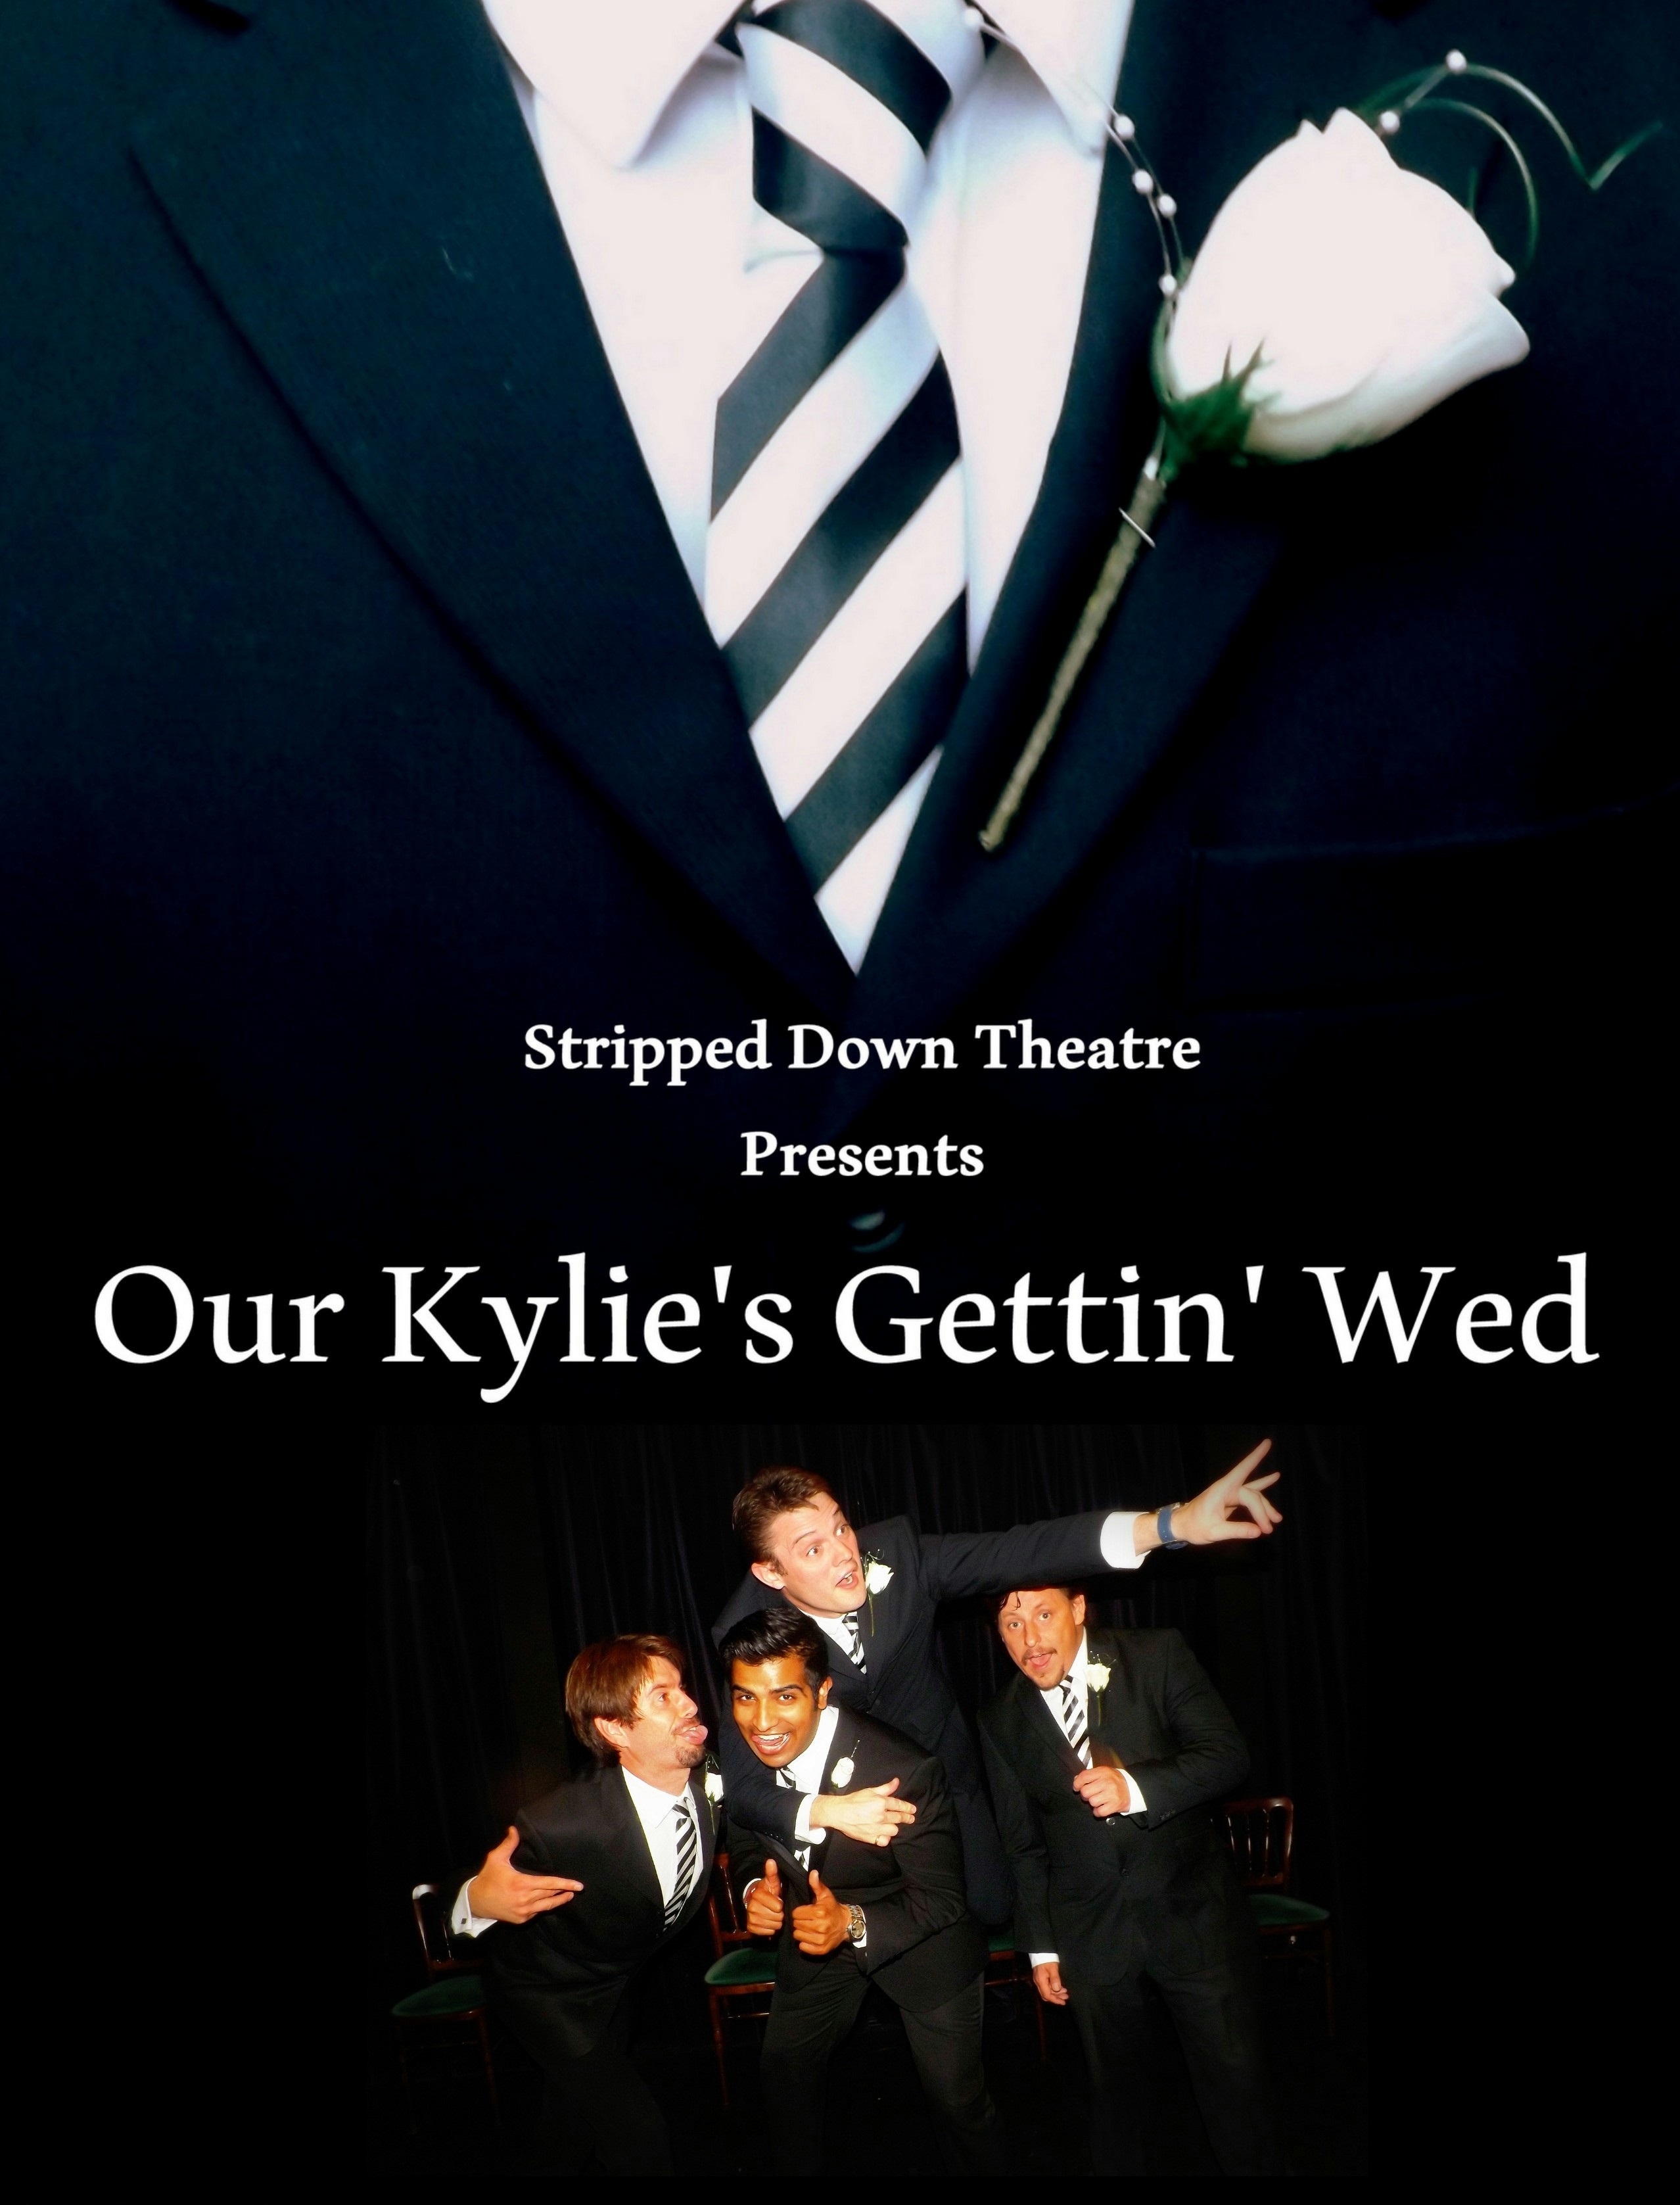 Our Kylie's Gettin' Wed